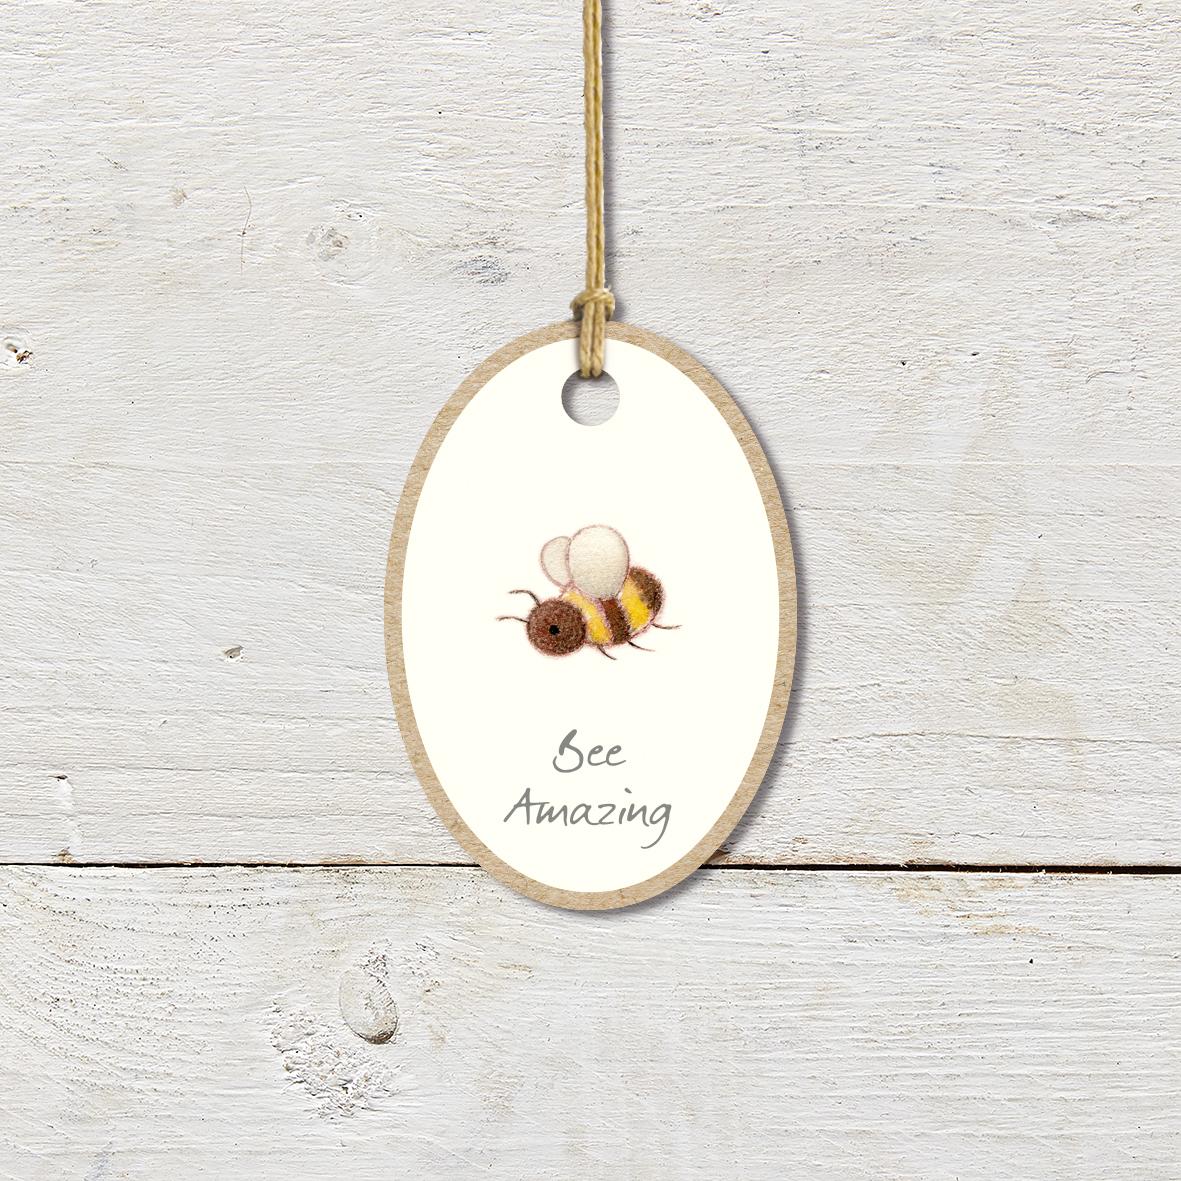 Small Wooden Keepsake Plaque/Tag featuring a cute bee with a ’Bee Amazing’ caption.